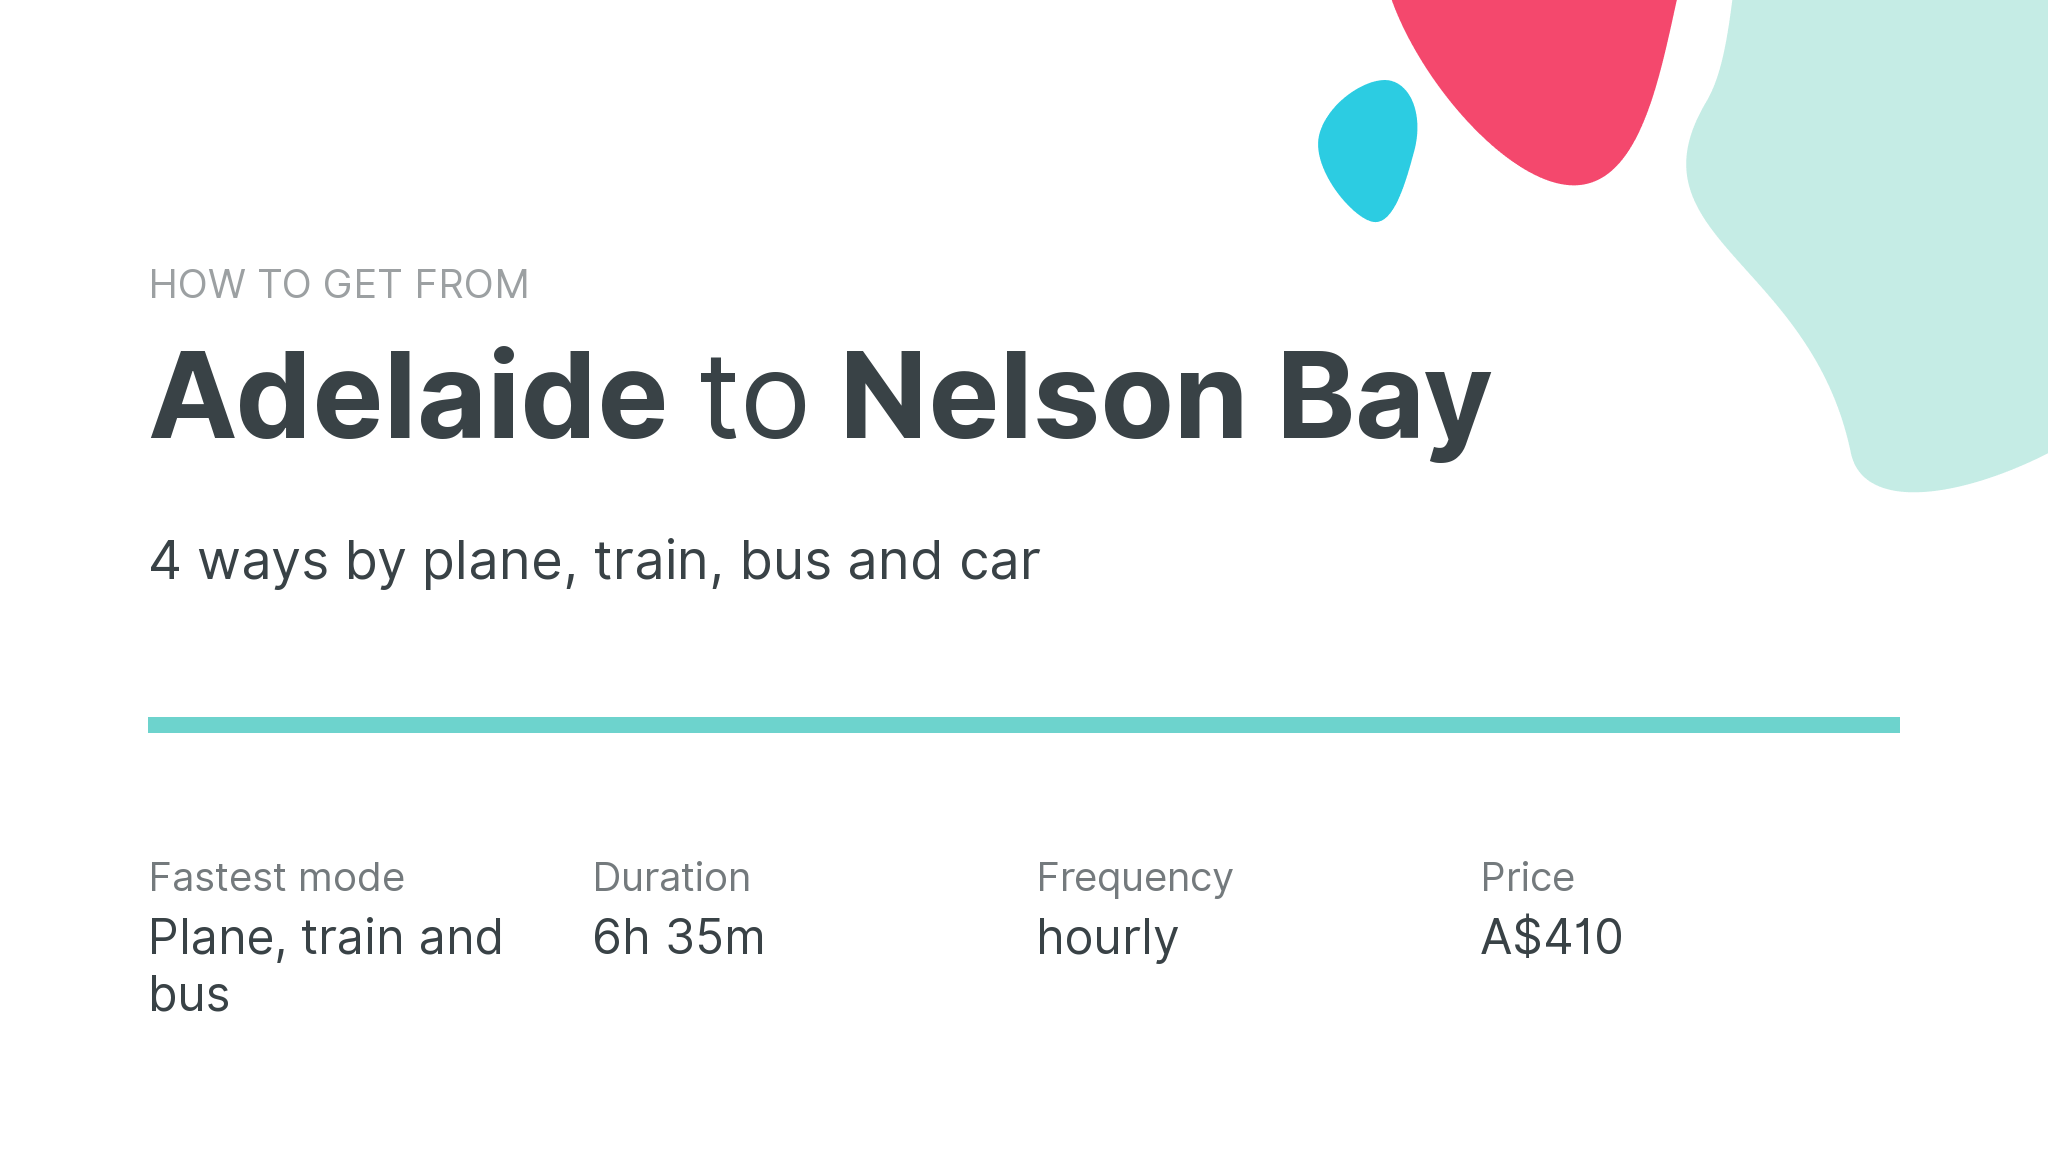 How do I get from Adelaide to Nelson Bay